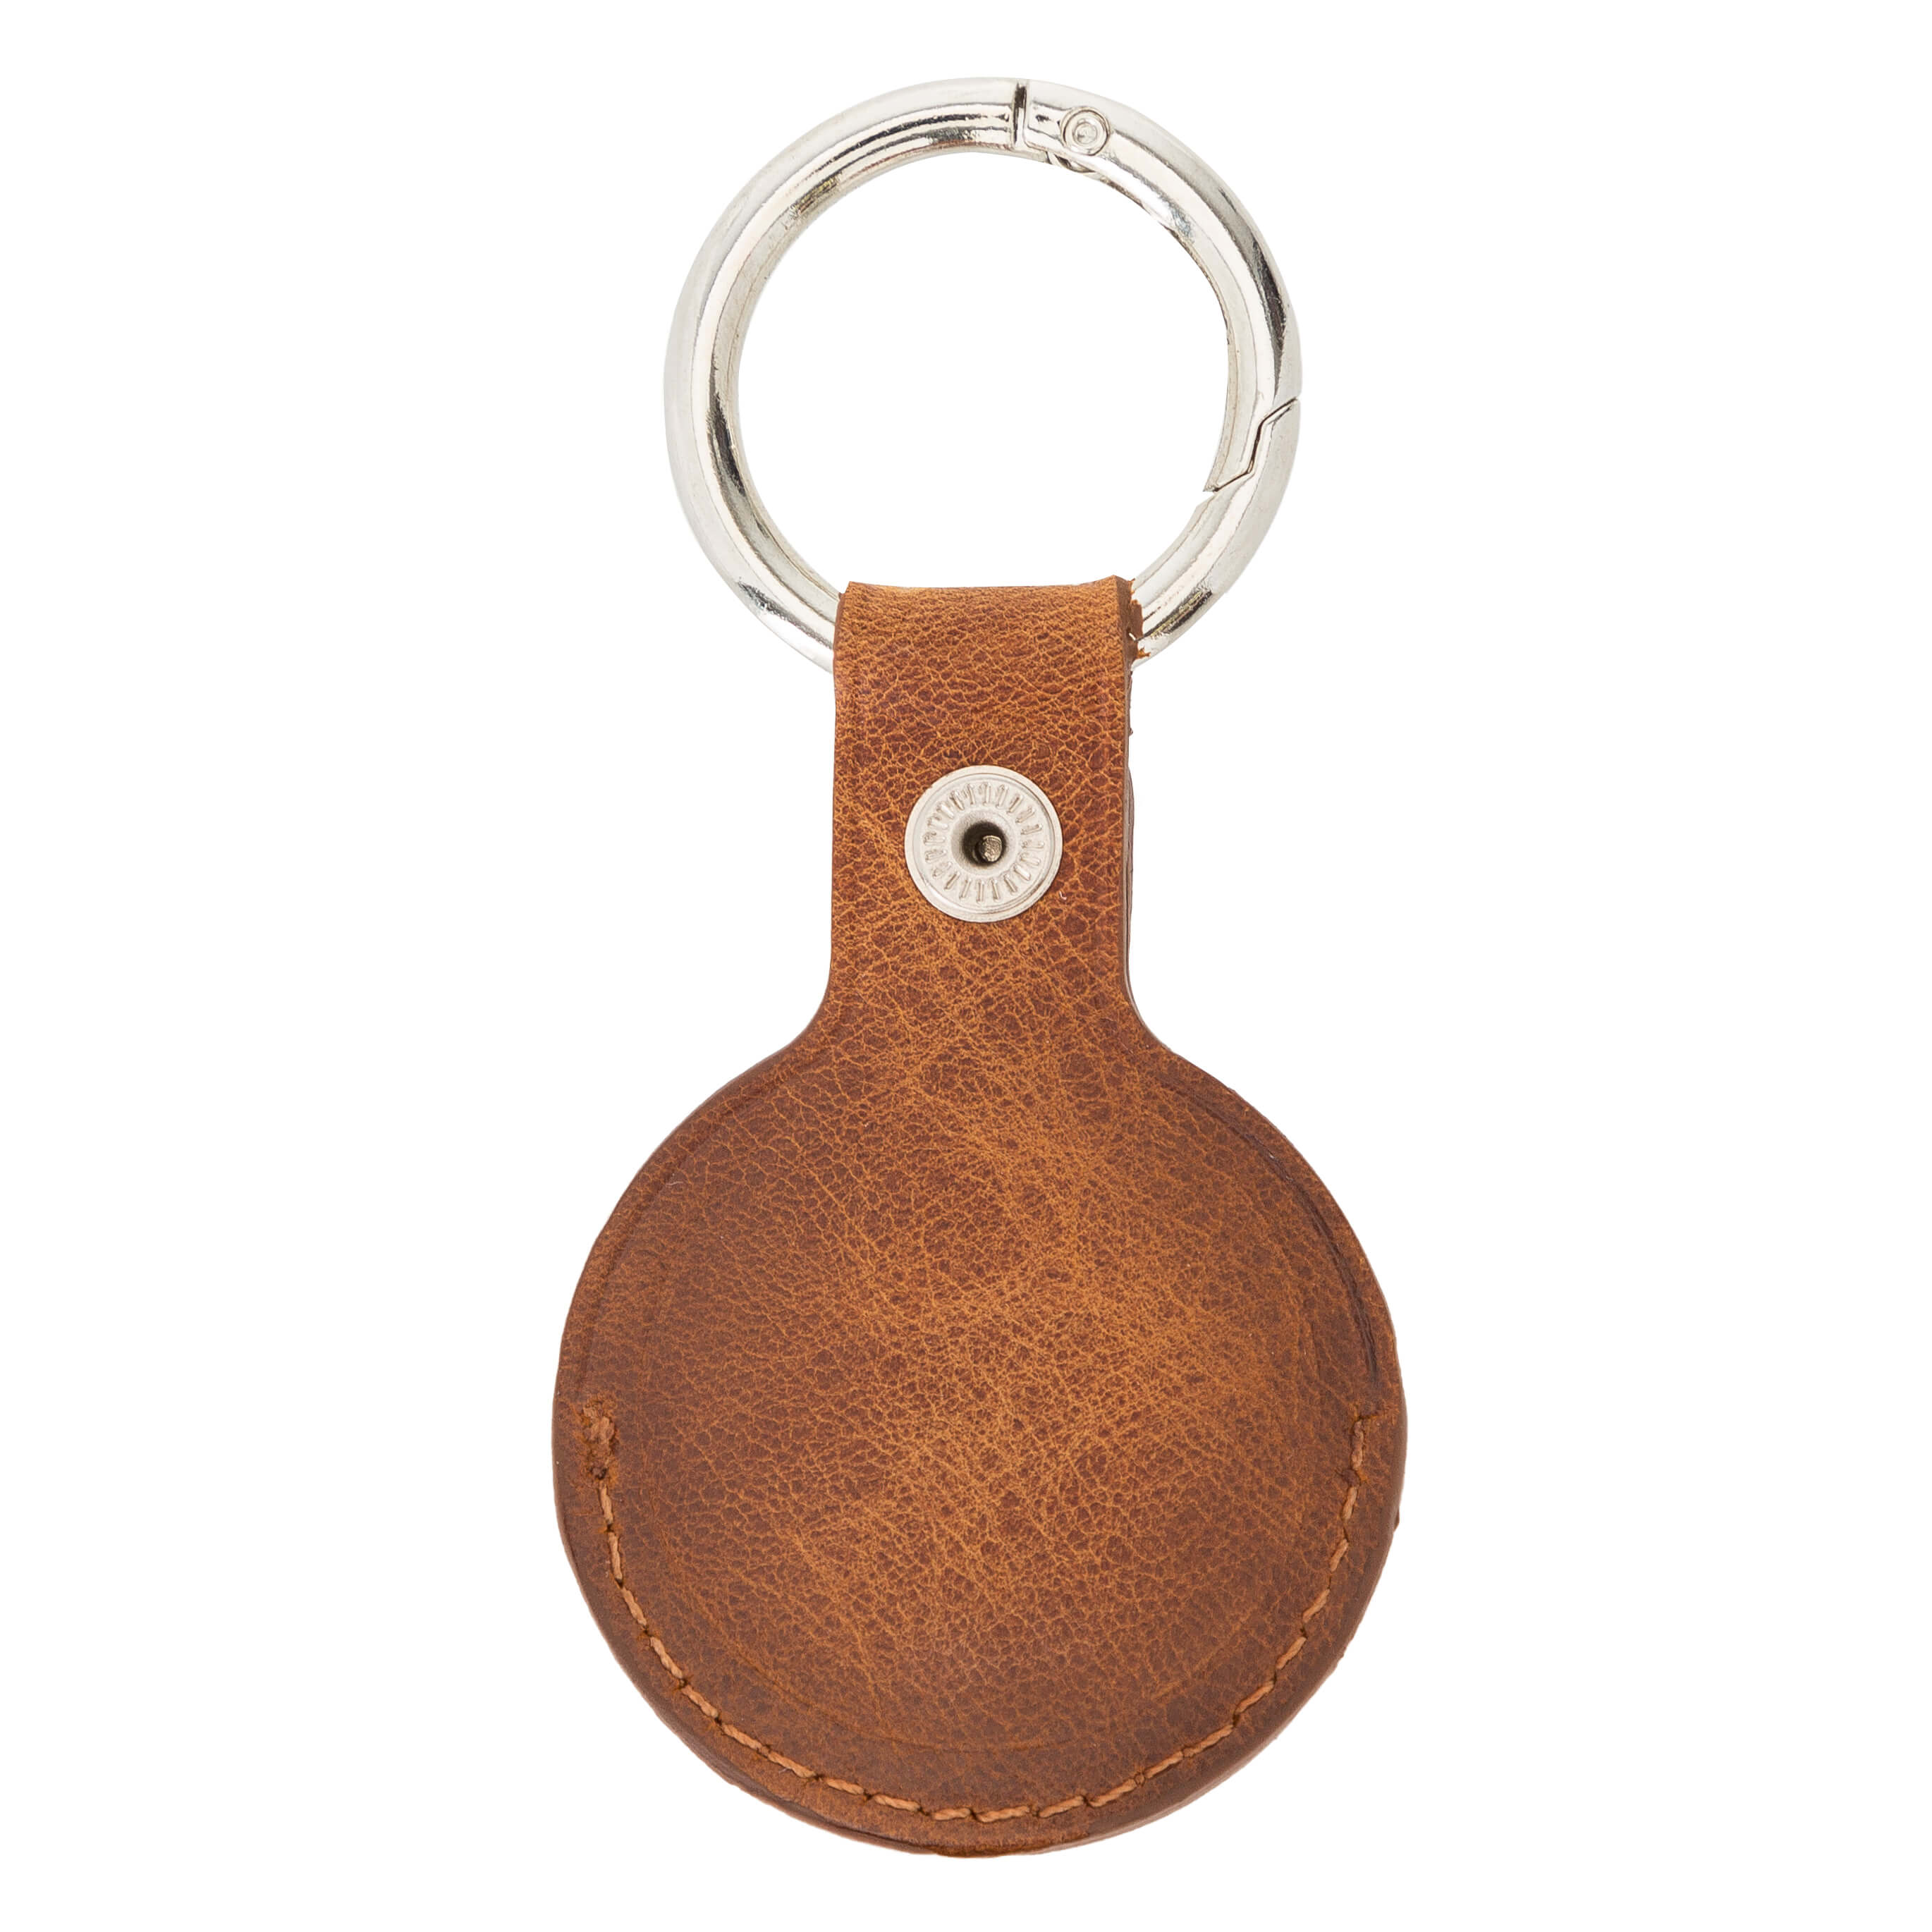 Leather Louisiana Key Ring - Father's Day & Gifts for Guys in Nola